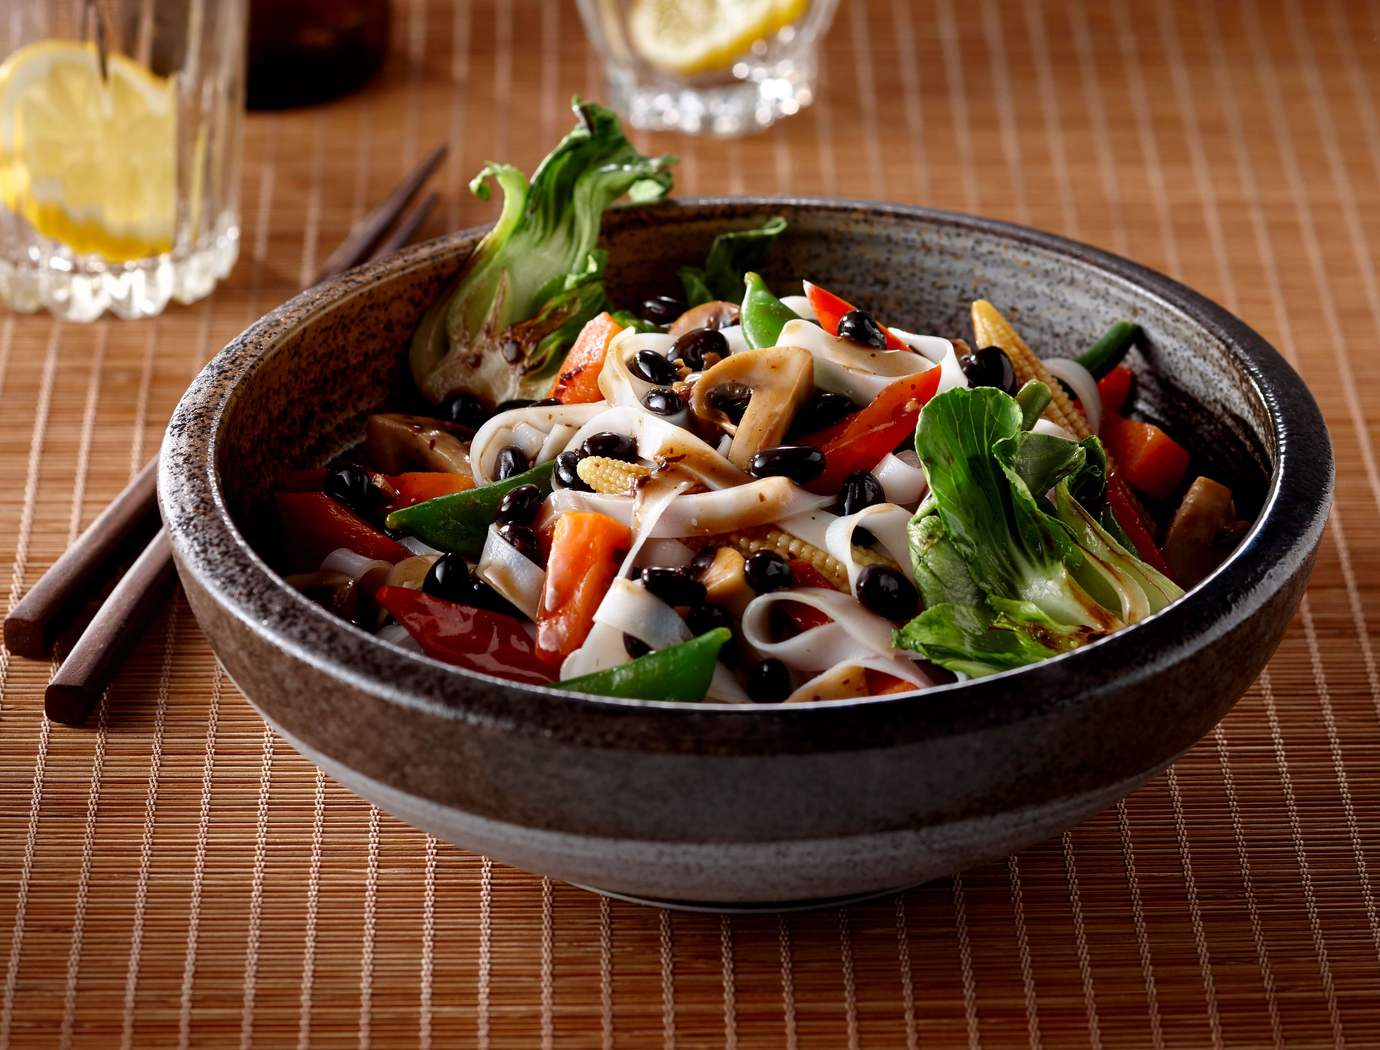 Noodles with vegetables and black beans